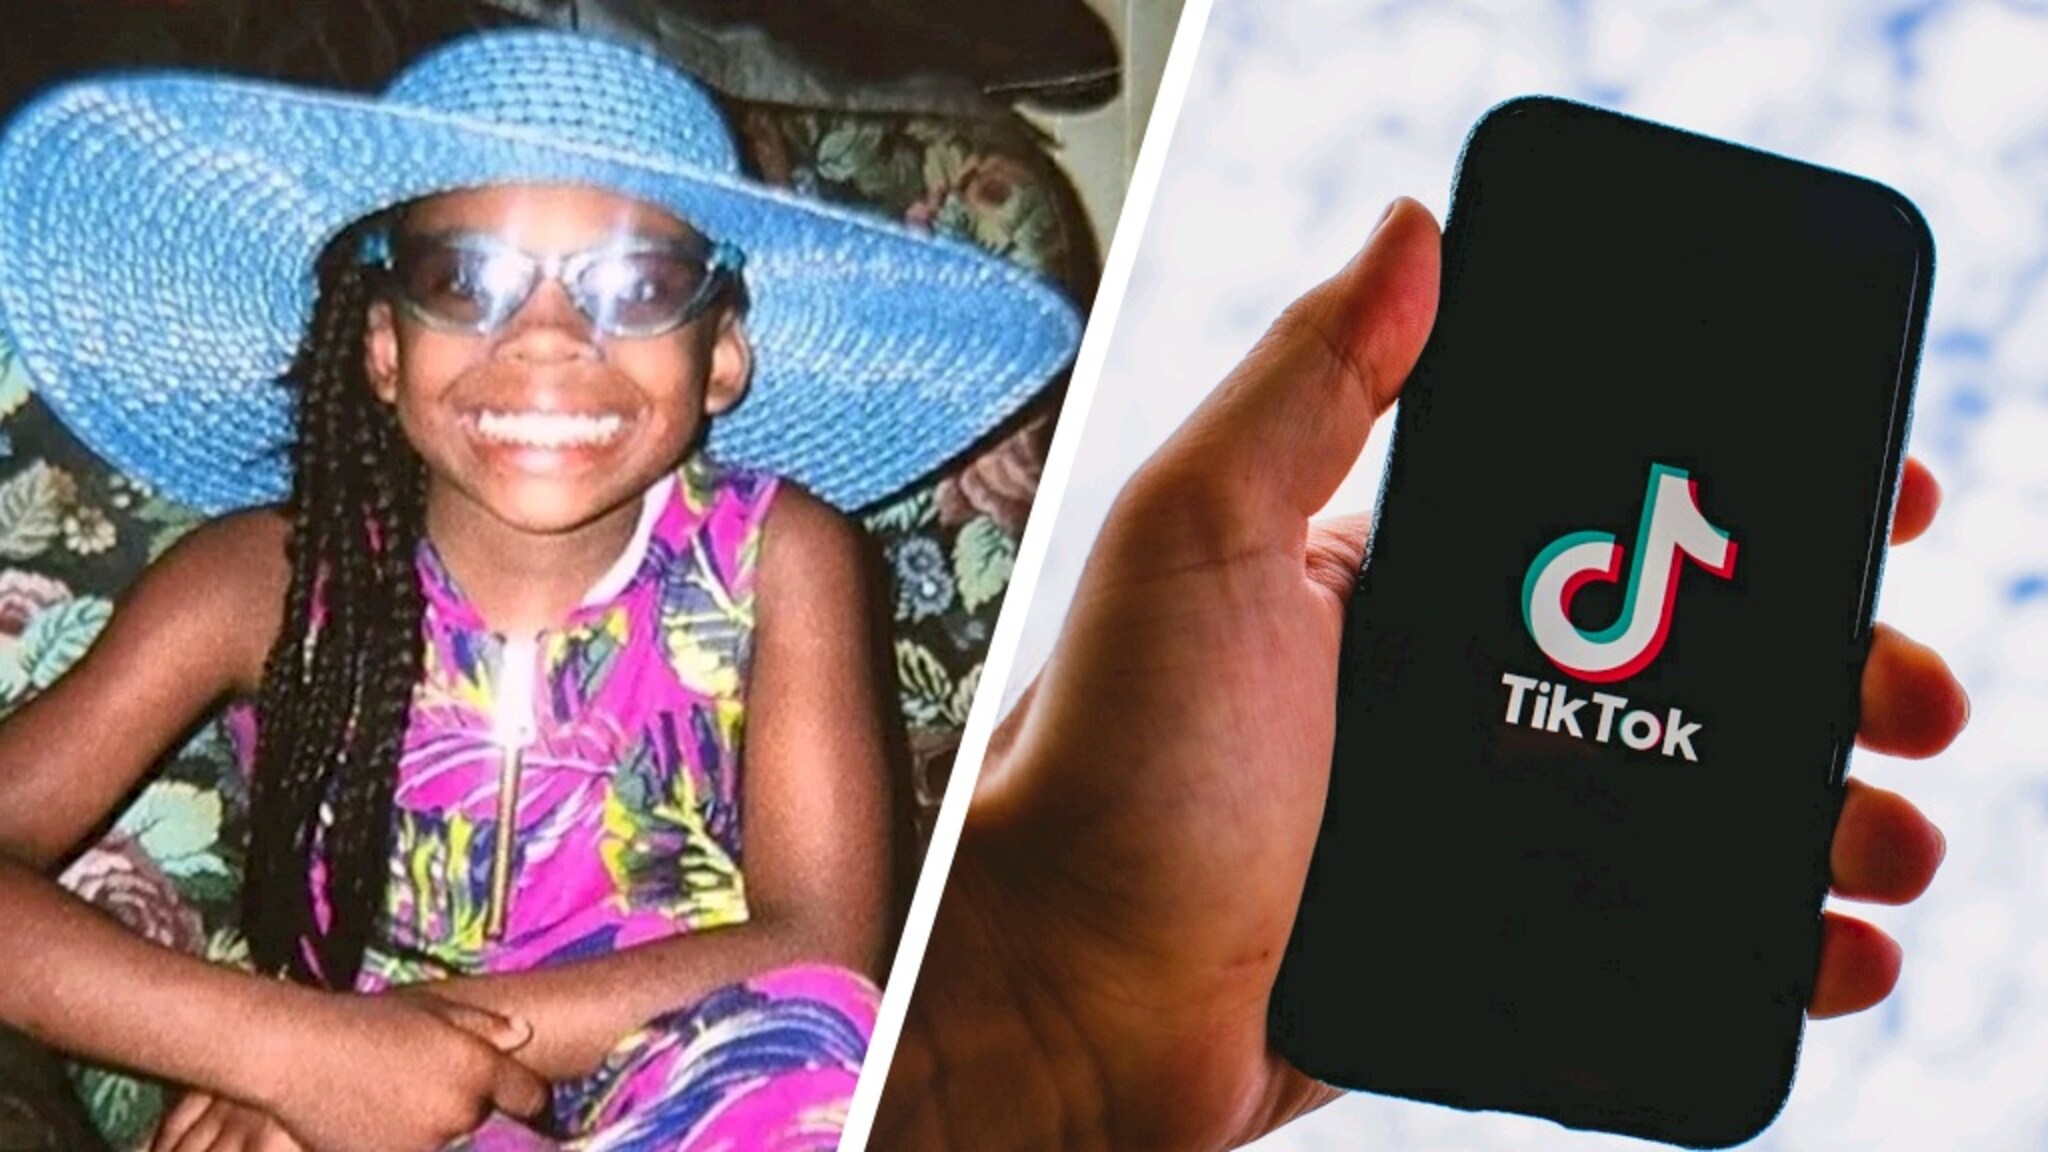 TikTok files a lawsuit against a 10-year-old girl who made a serious challenge